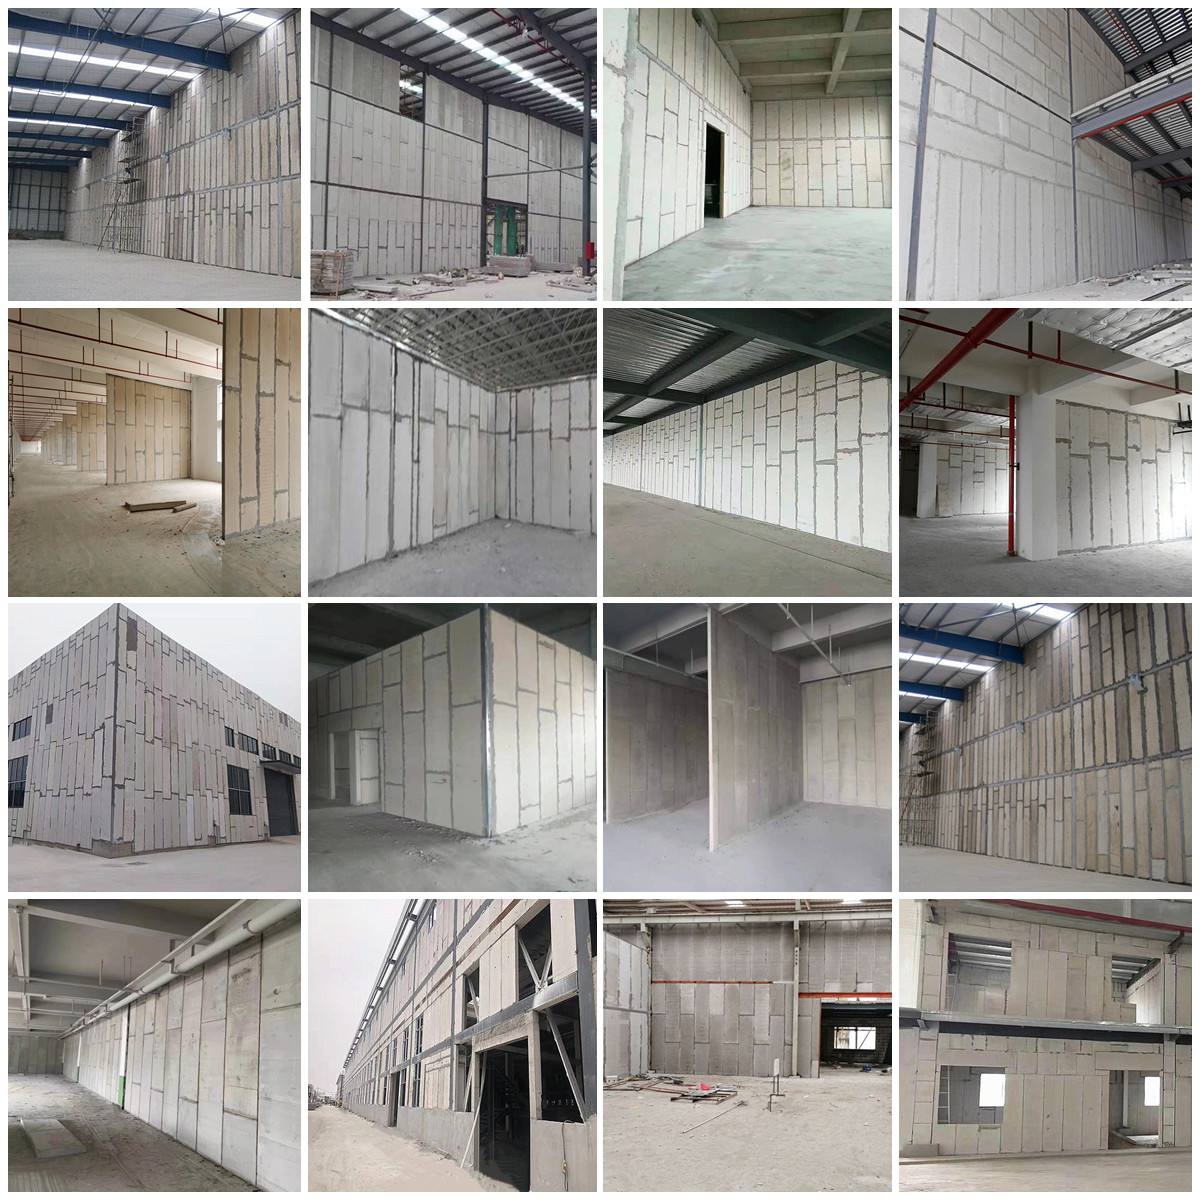 QB lightweight 3D steel mesh partition board easy to install fireproof moisture-proof sound insulation wall panels